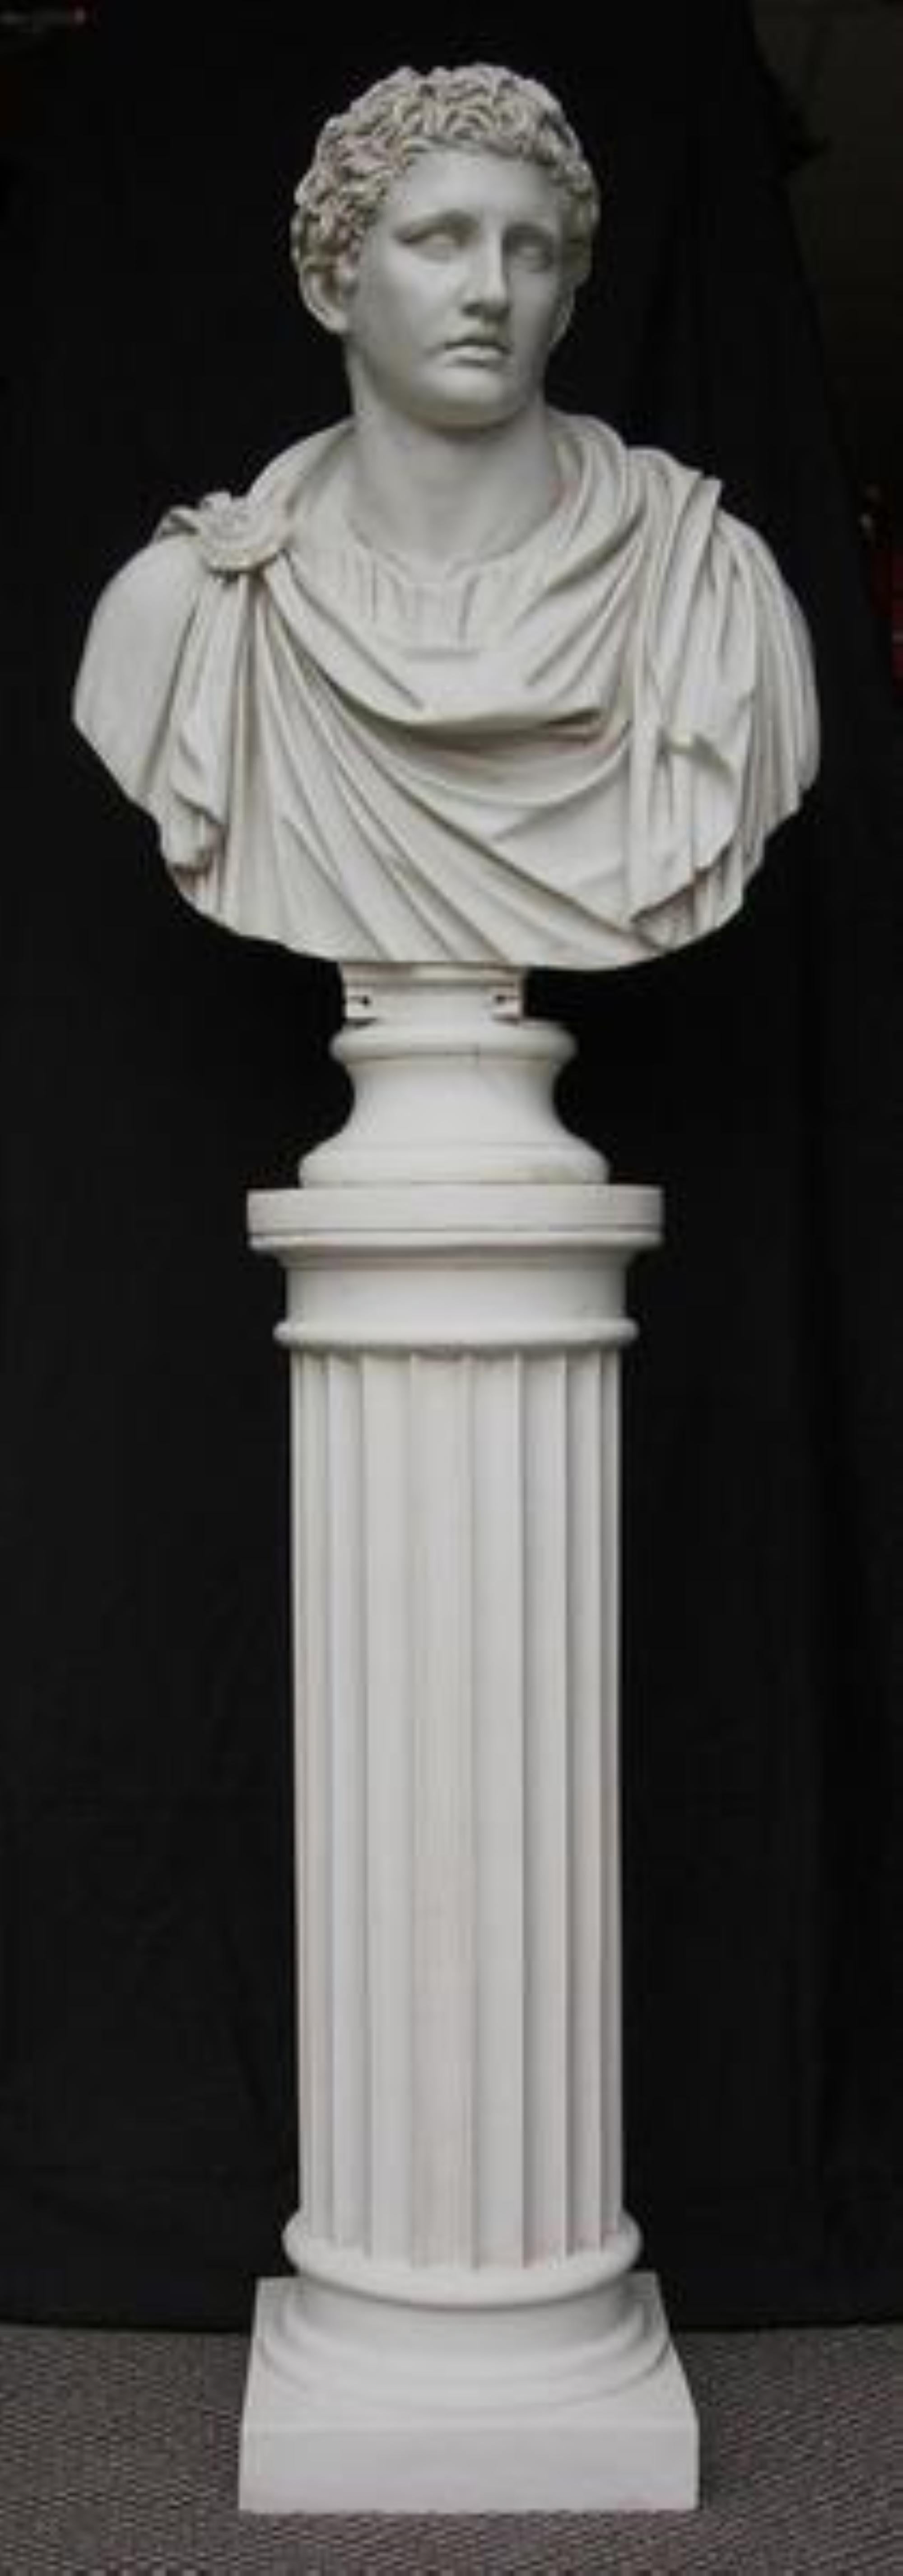 Mark Antony, a bust, in toga drapery, 20th century.
A fantastic large library bust of Marcus Antonius, who was a Roman politician and general. He was an important supporter and the loyal friend of Gaius Julius Caesar as a military commander and